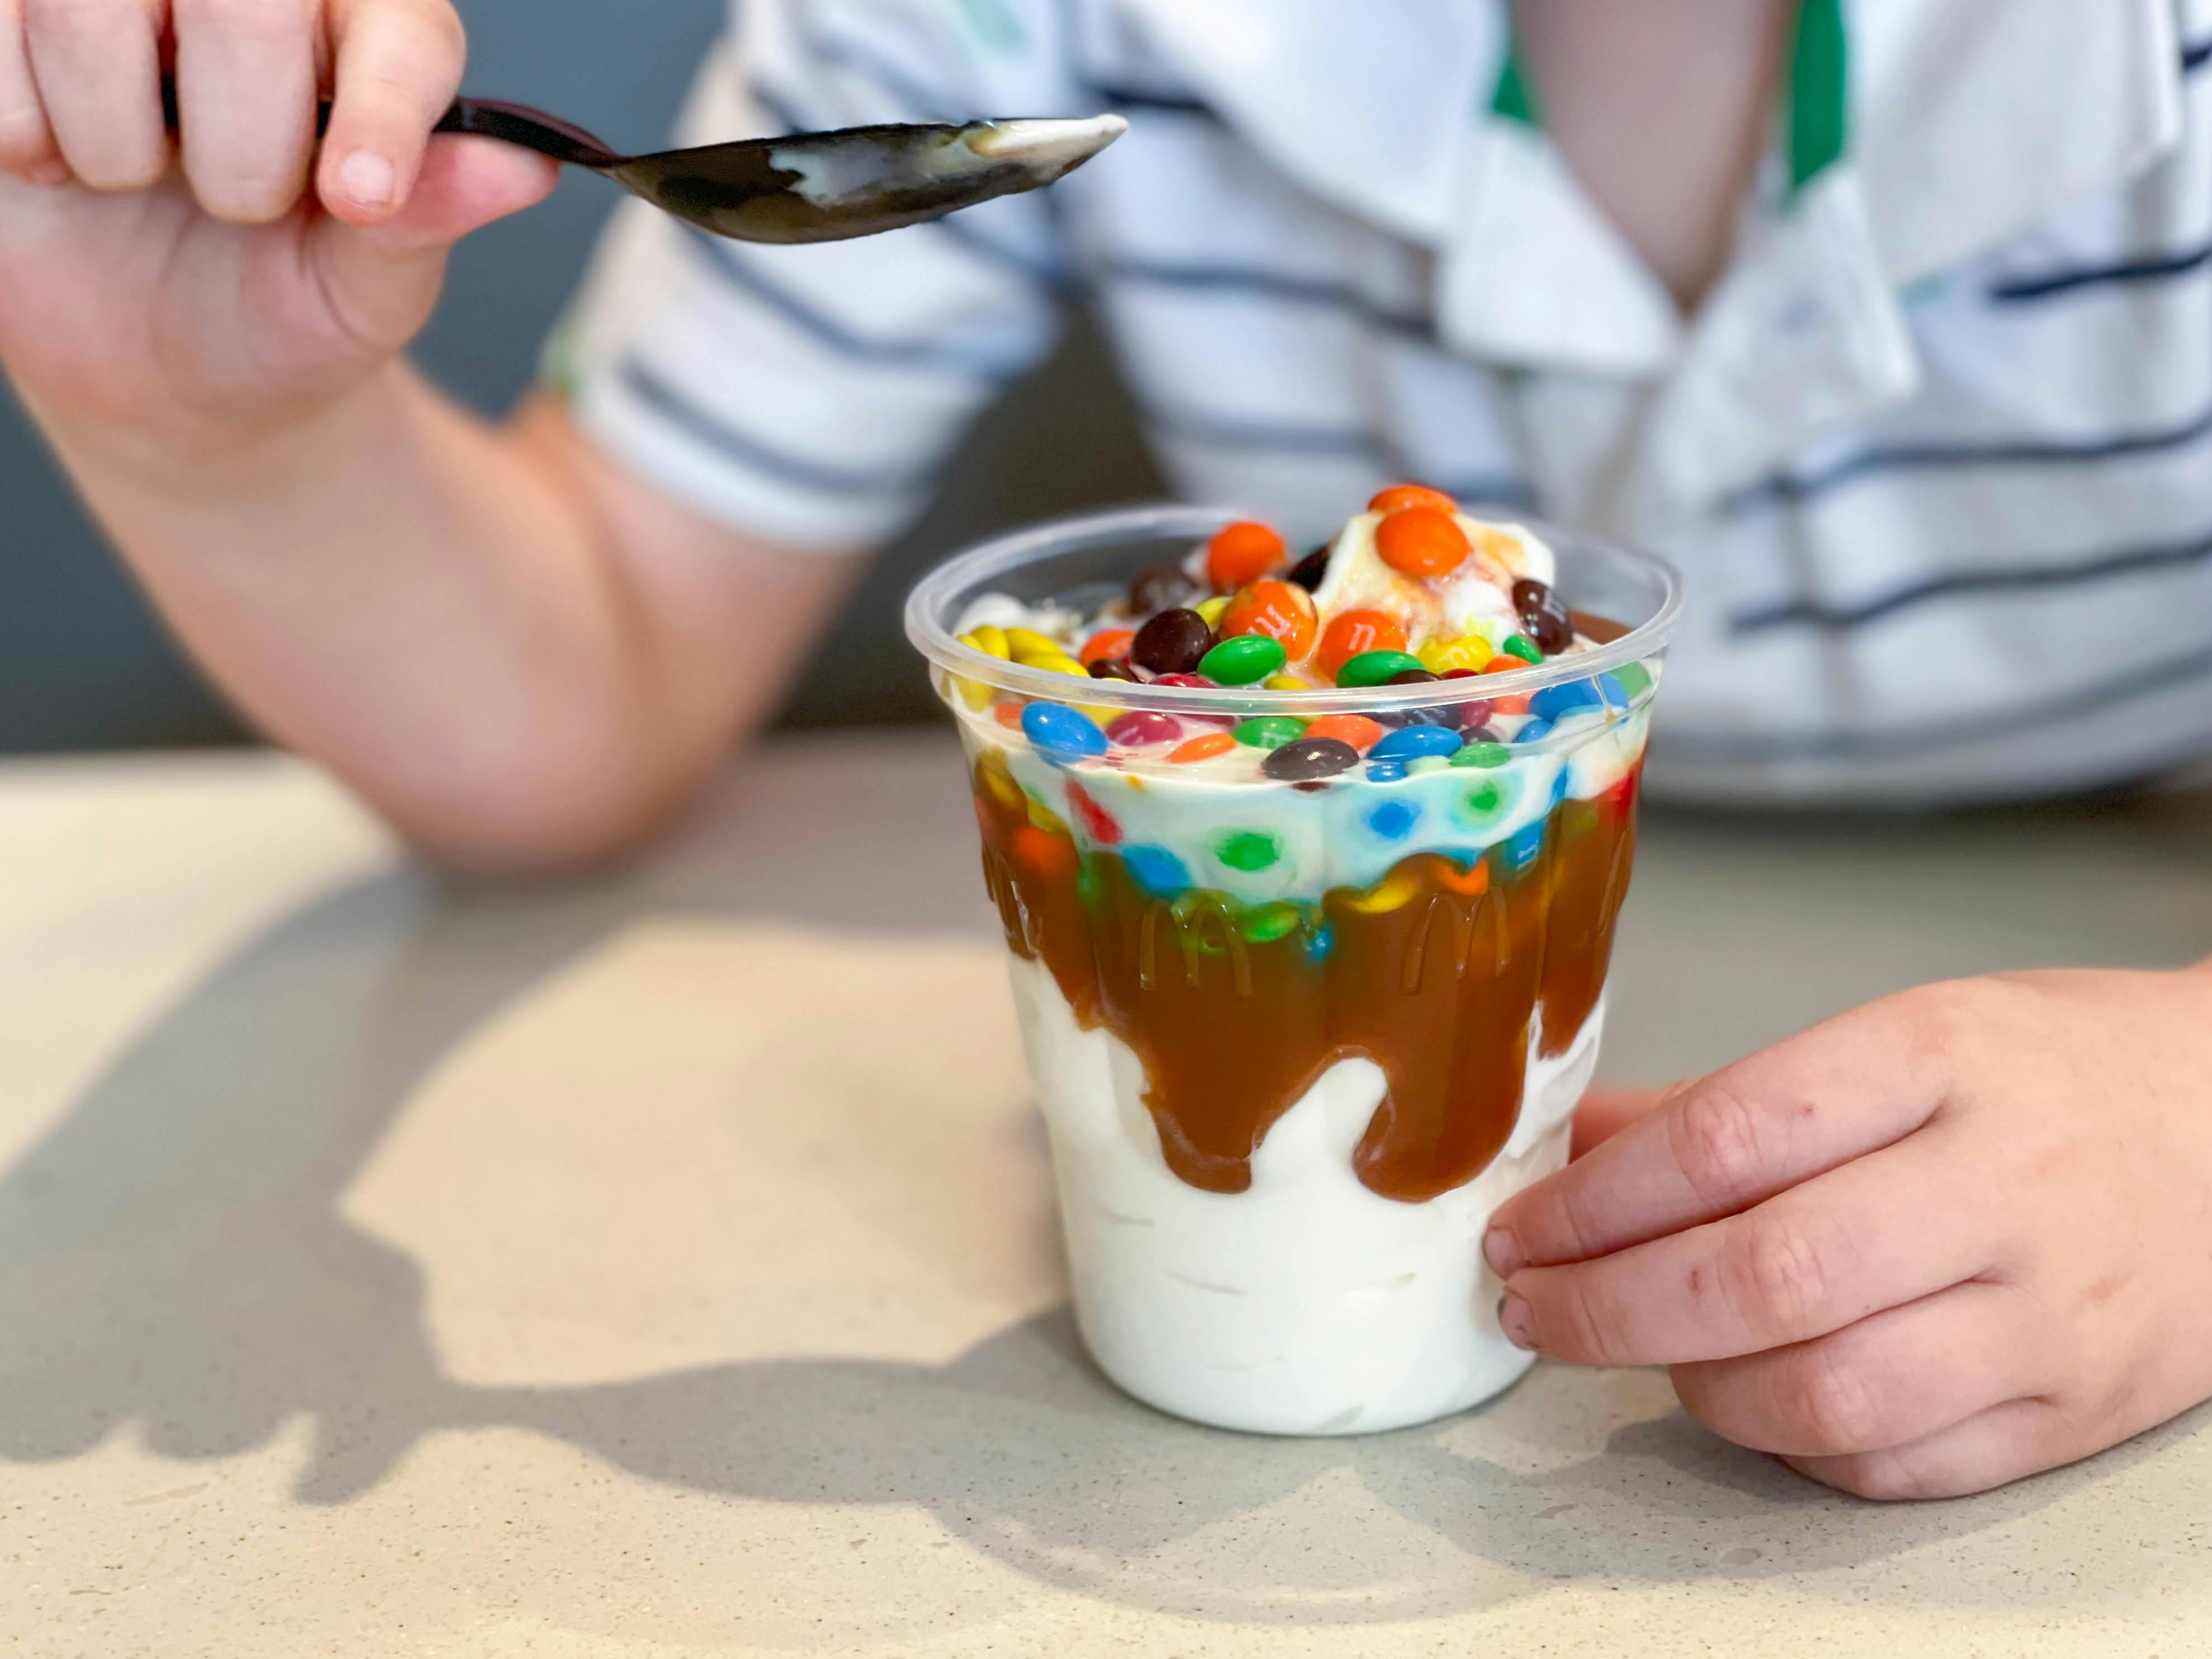 A child using a spoon to eat a sundae with McFlurry toppings at McDonald's.